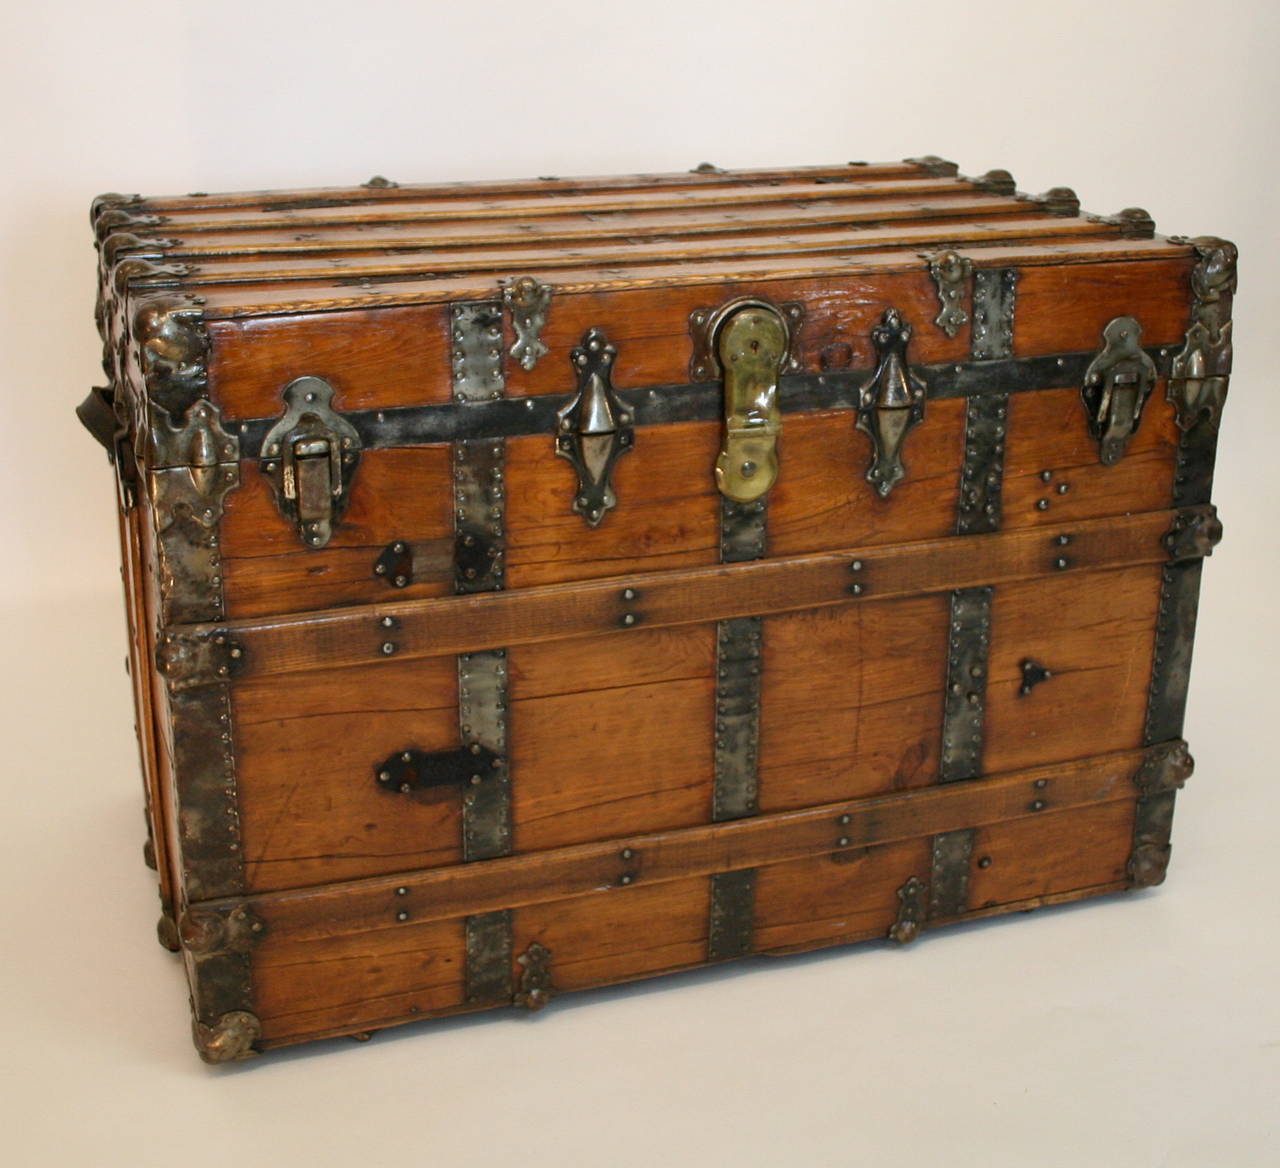 Large Antique Flat Top Trunk.  Circa mid-late 19th century.  Brass, pine and leather construction.  Trunk has been fully restored.